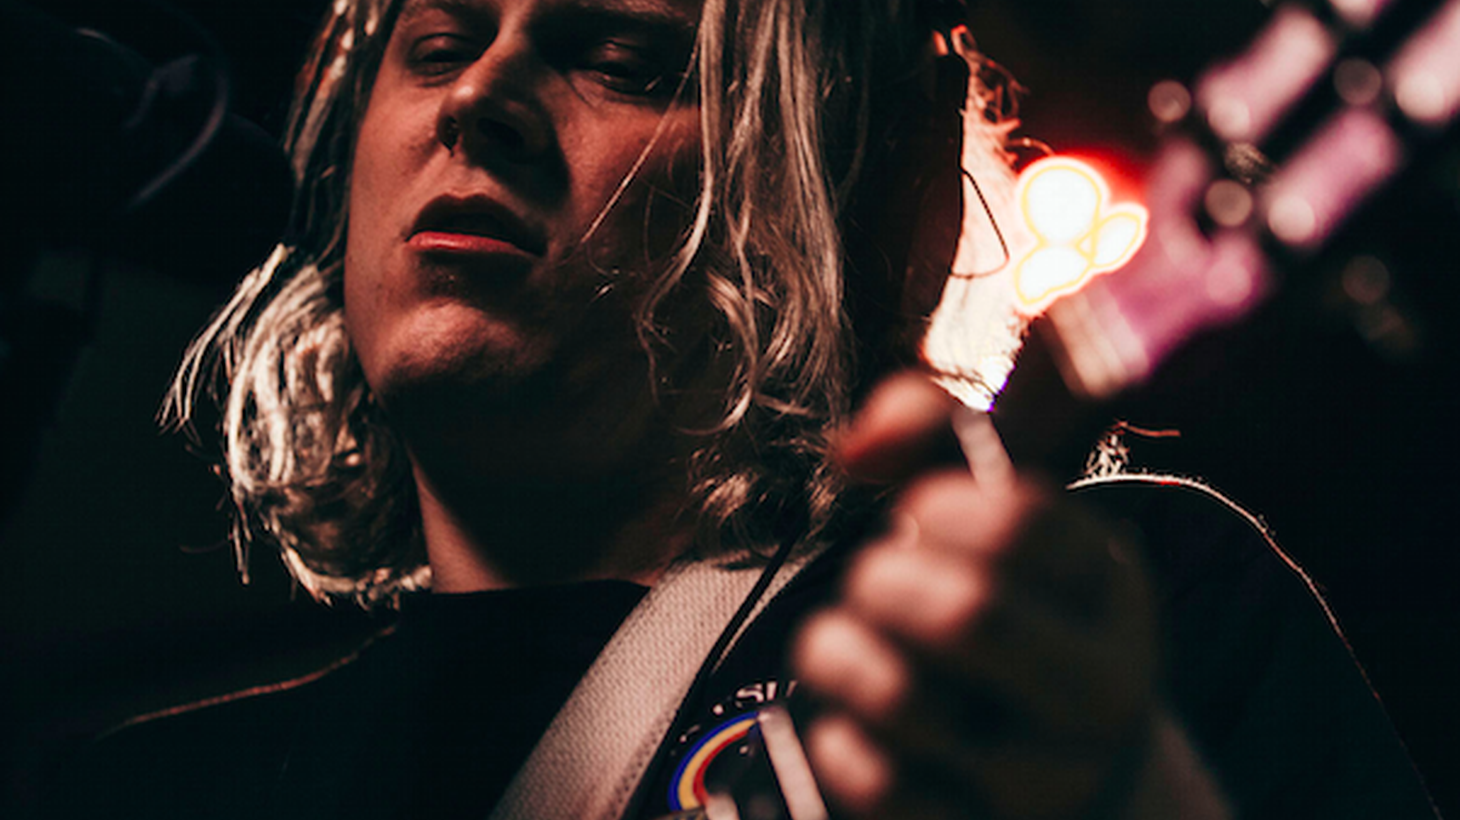 The songs we’ve sampled off LA rocker Ty Segall’s forthcoming album are some of his best yet. He’ll pop by our studio to premiere more new material from Freedom’s Goblin, in advance of its January 26 release.